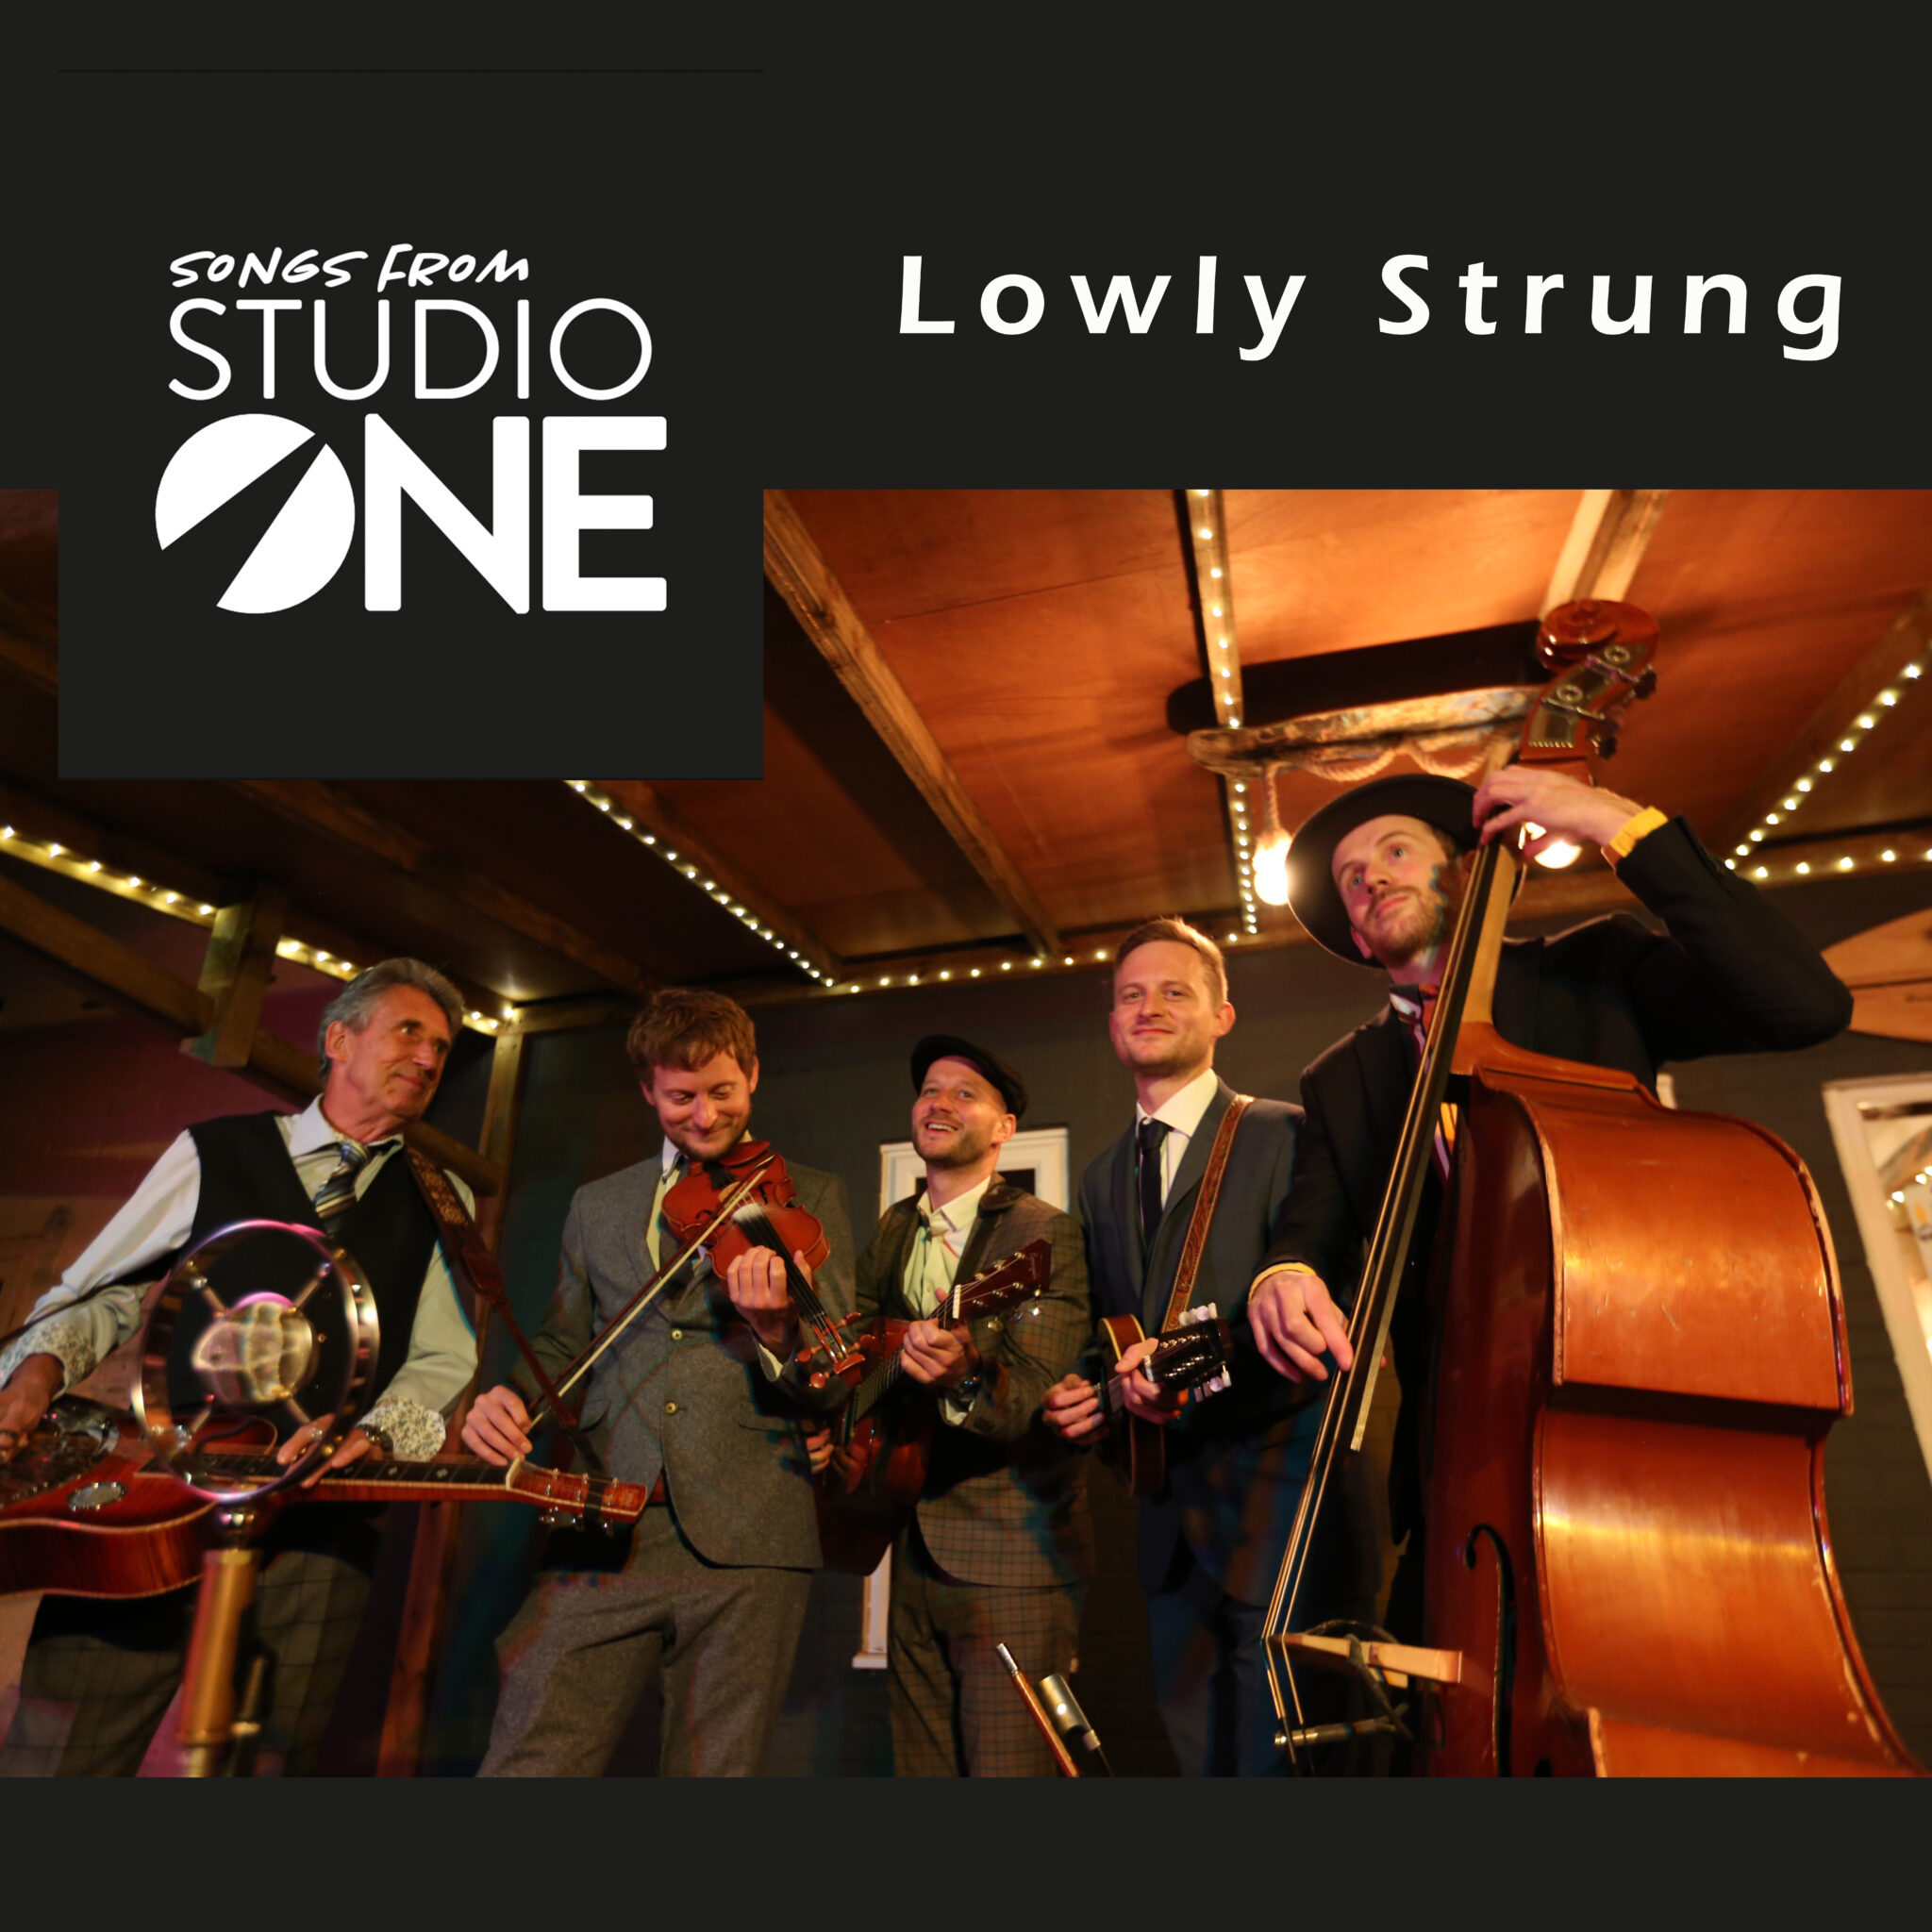 Songs From Studio One with Lowly Strung